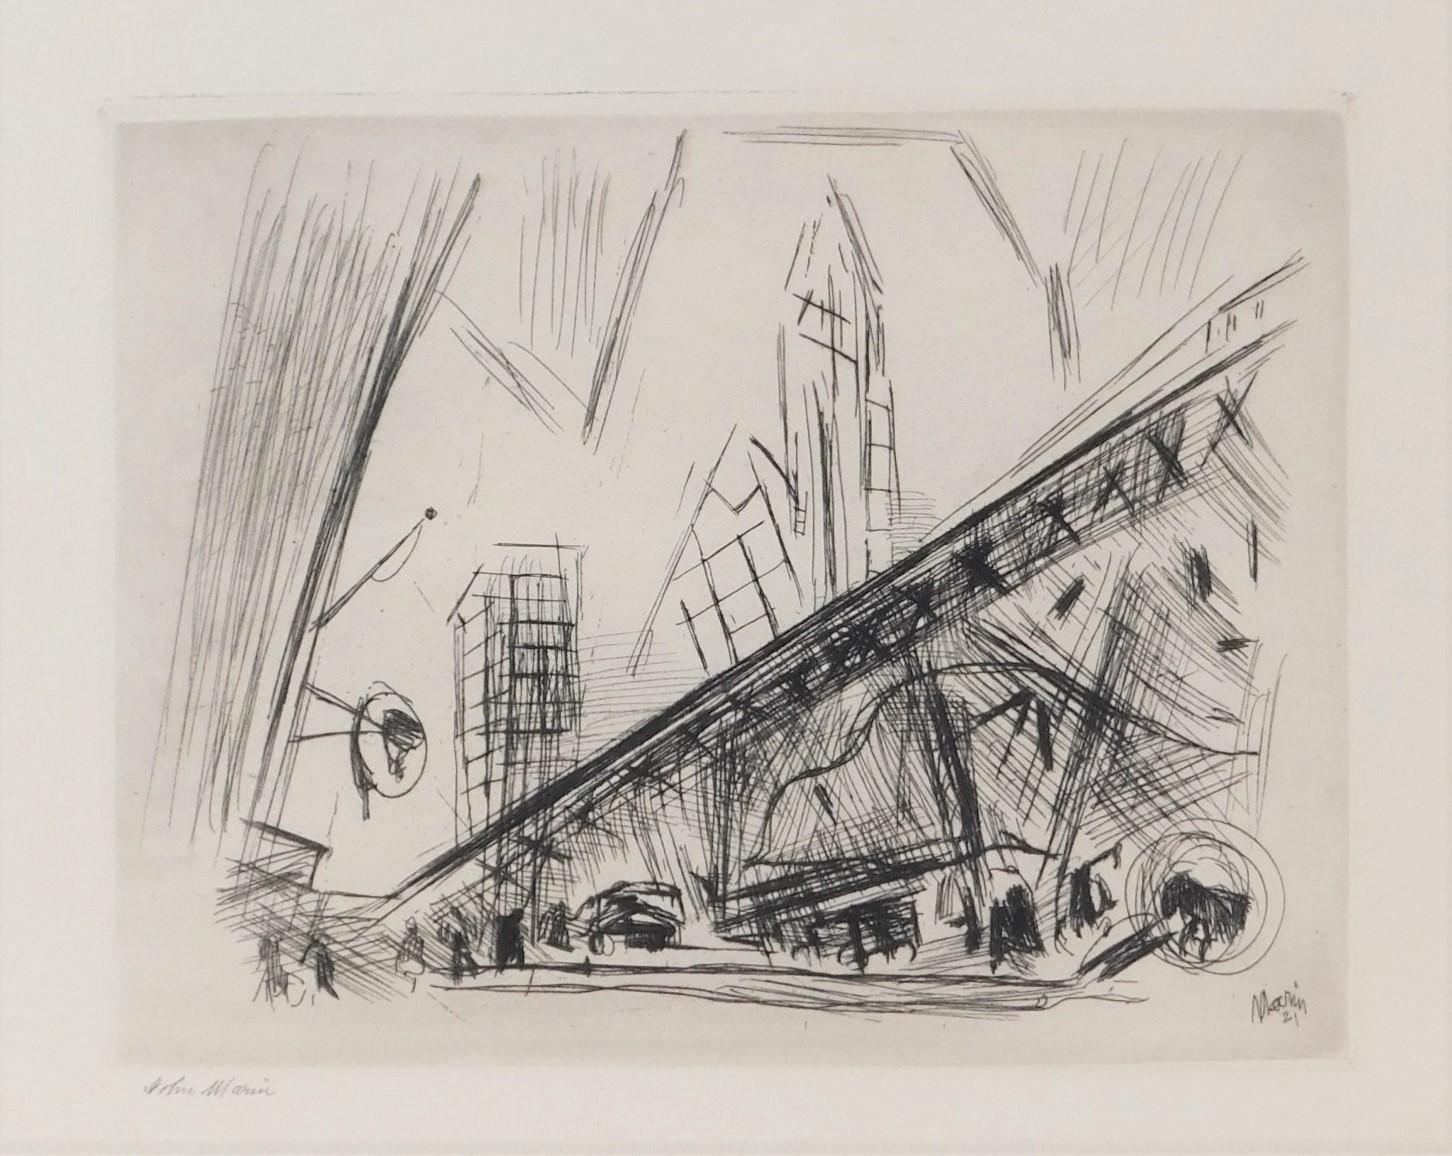 Beautiful etching by John Marin (1870-1953) created 1921.
Title: Downtown, The El (From the New Republic Set)
Medium: Etching 
Size: 6 7/8 x 8 5/8. Sheet: 10 3/4 x 14. Mat: 16 x 17 3/4
Signed in pencil lower left. Also signed and dated lower right